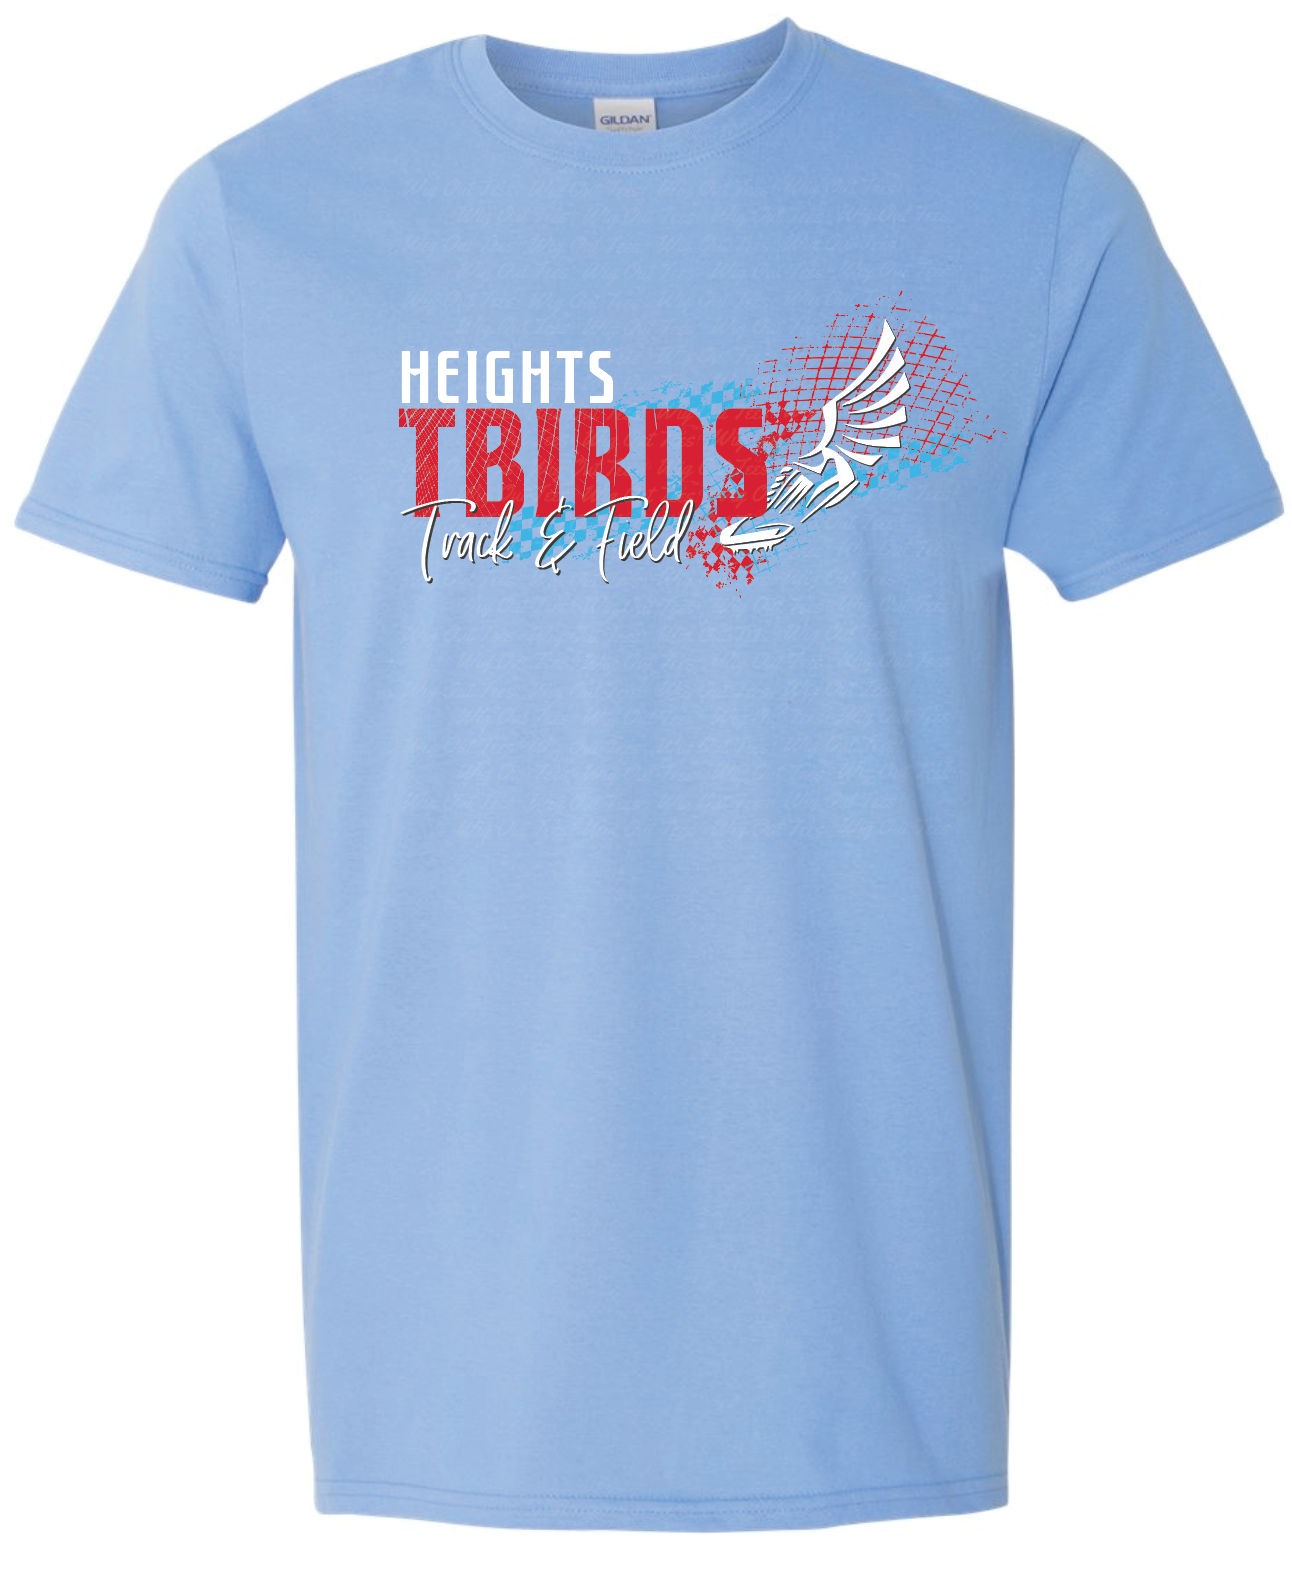 Tbirds Track and Field Softstyle T-shirt